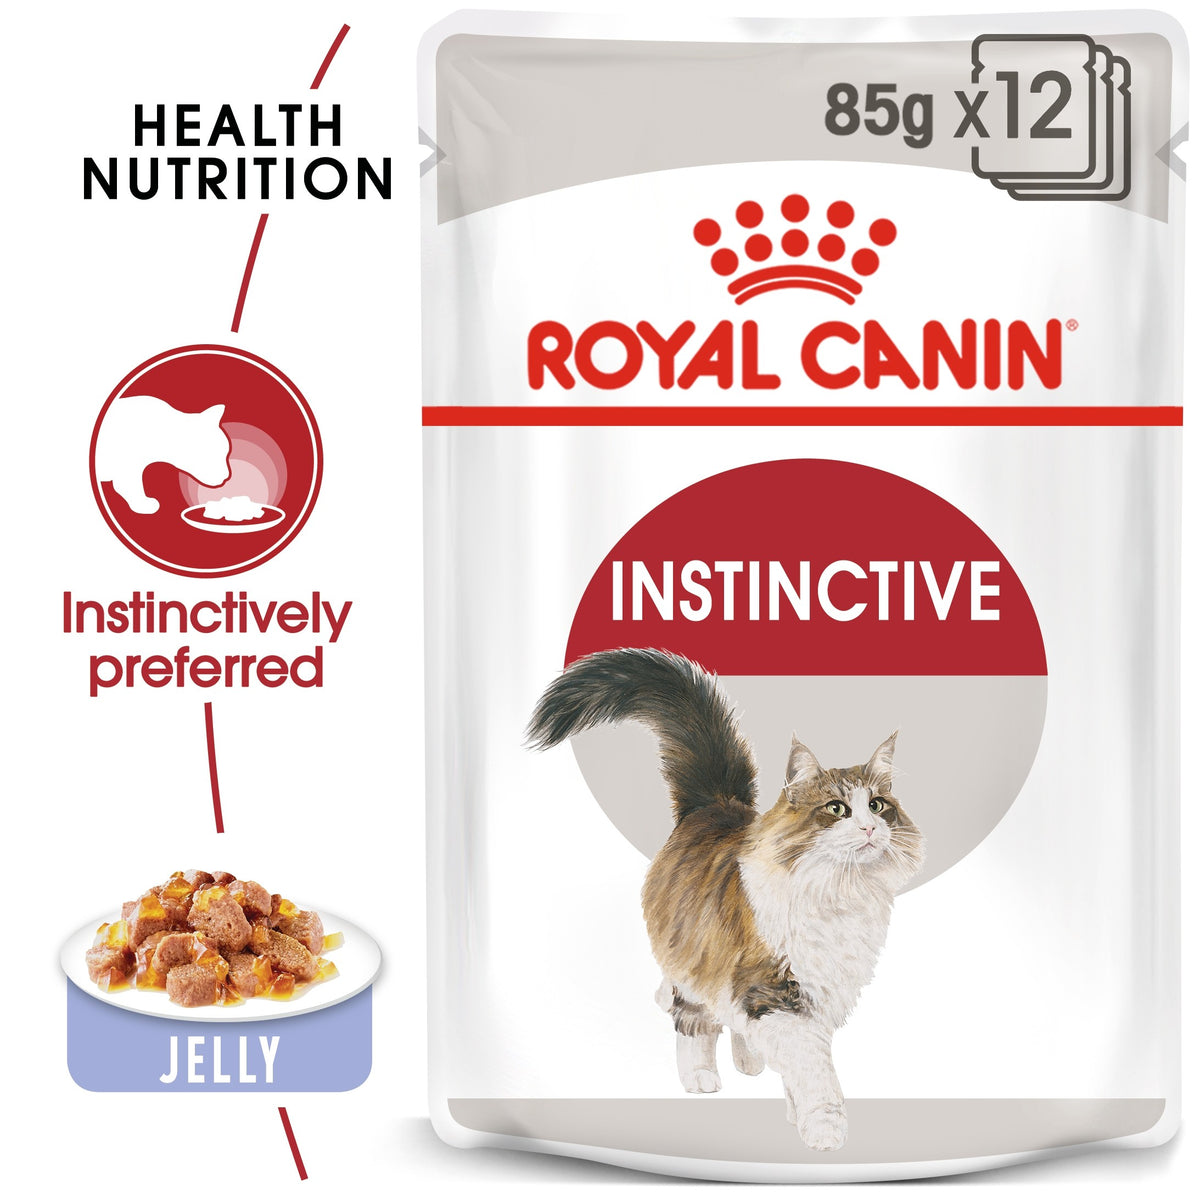 FELINE HEALTH NUTRITION INSTINCTIVE ADULT CATS JELLY (WET FOOD) - 12 POUCHES